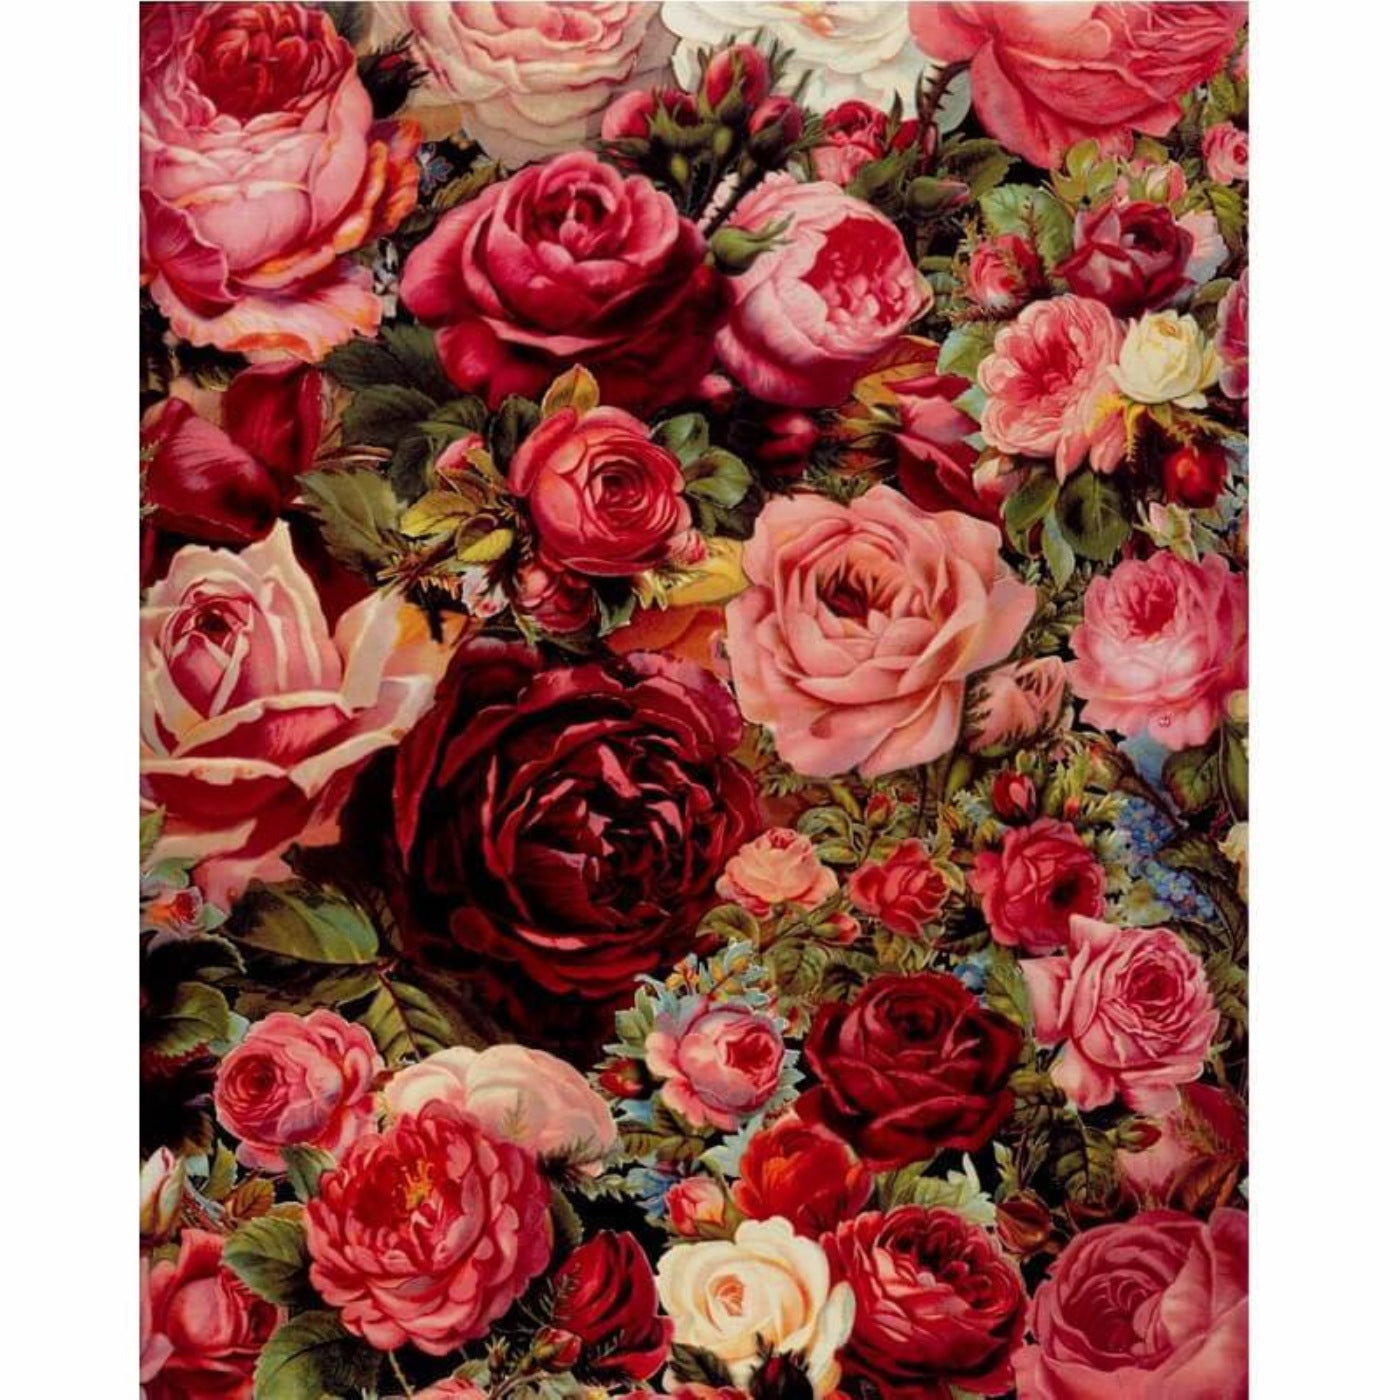 Sea of roses | Paint by Numbers